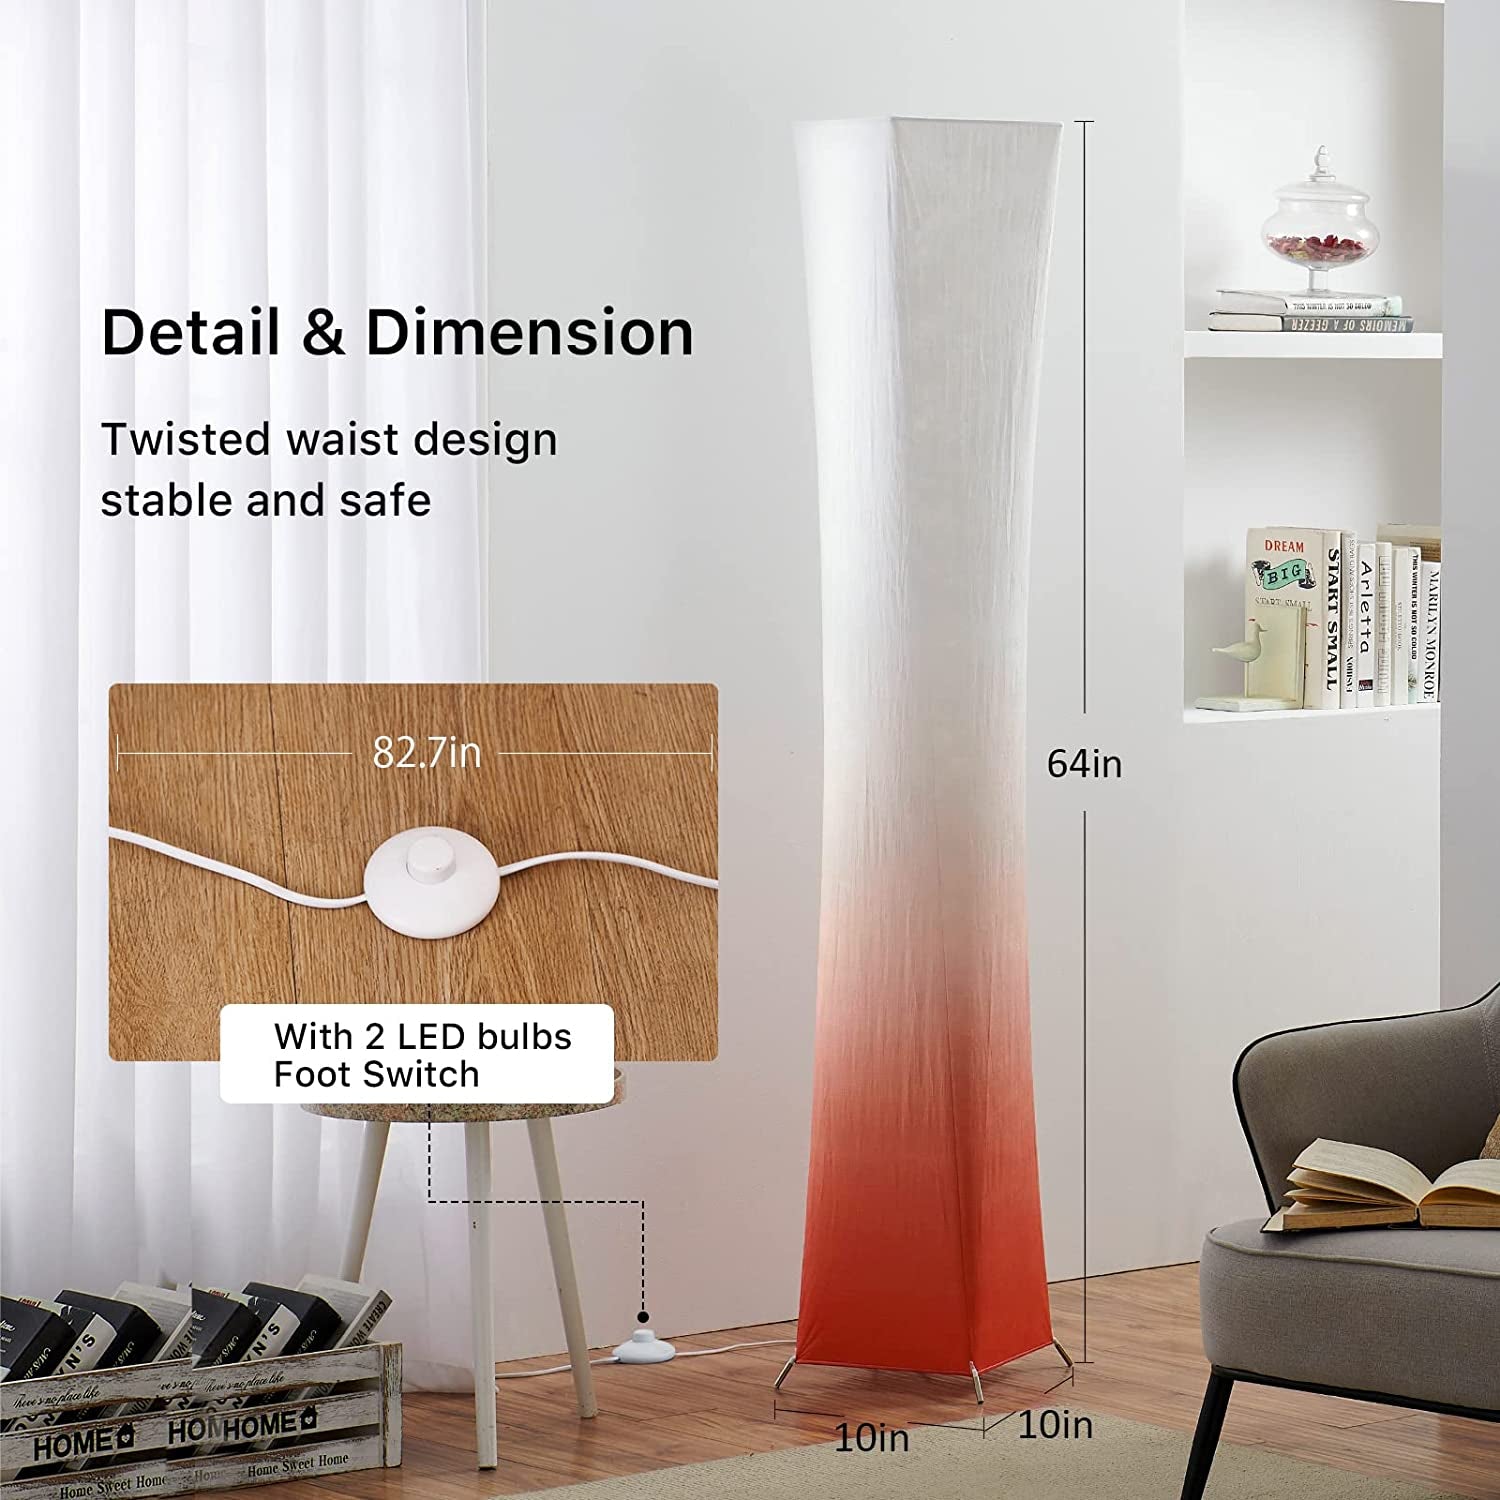 Floor Lamp for Living Room, 64"(XL) Standing Lamp, RGB Color Changing LED Bulbs, Adjustable Brightness Color Temperature, Red Fabric Lampshade, Remote Control, for Bedroom Kids Room Play Room